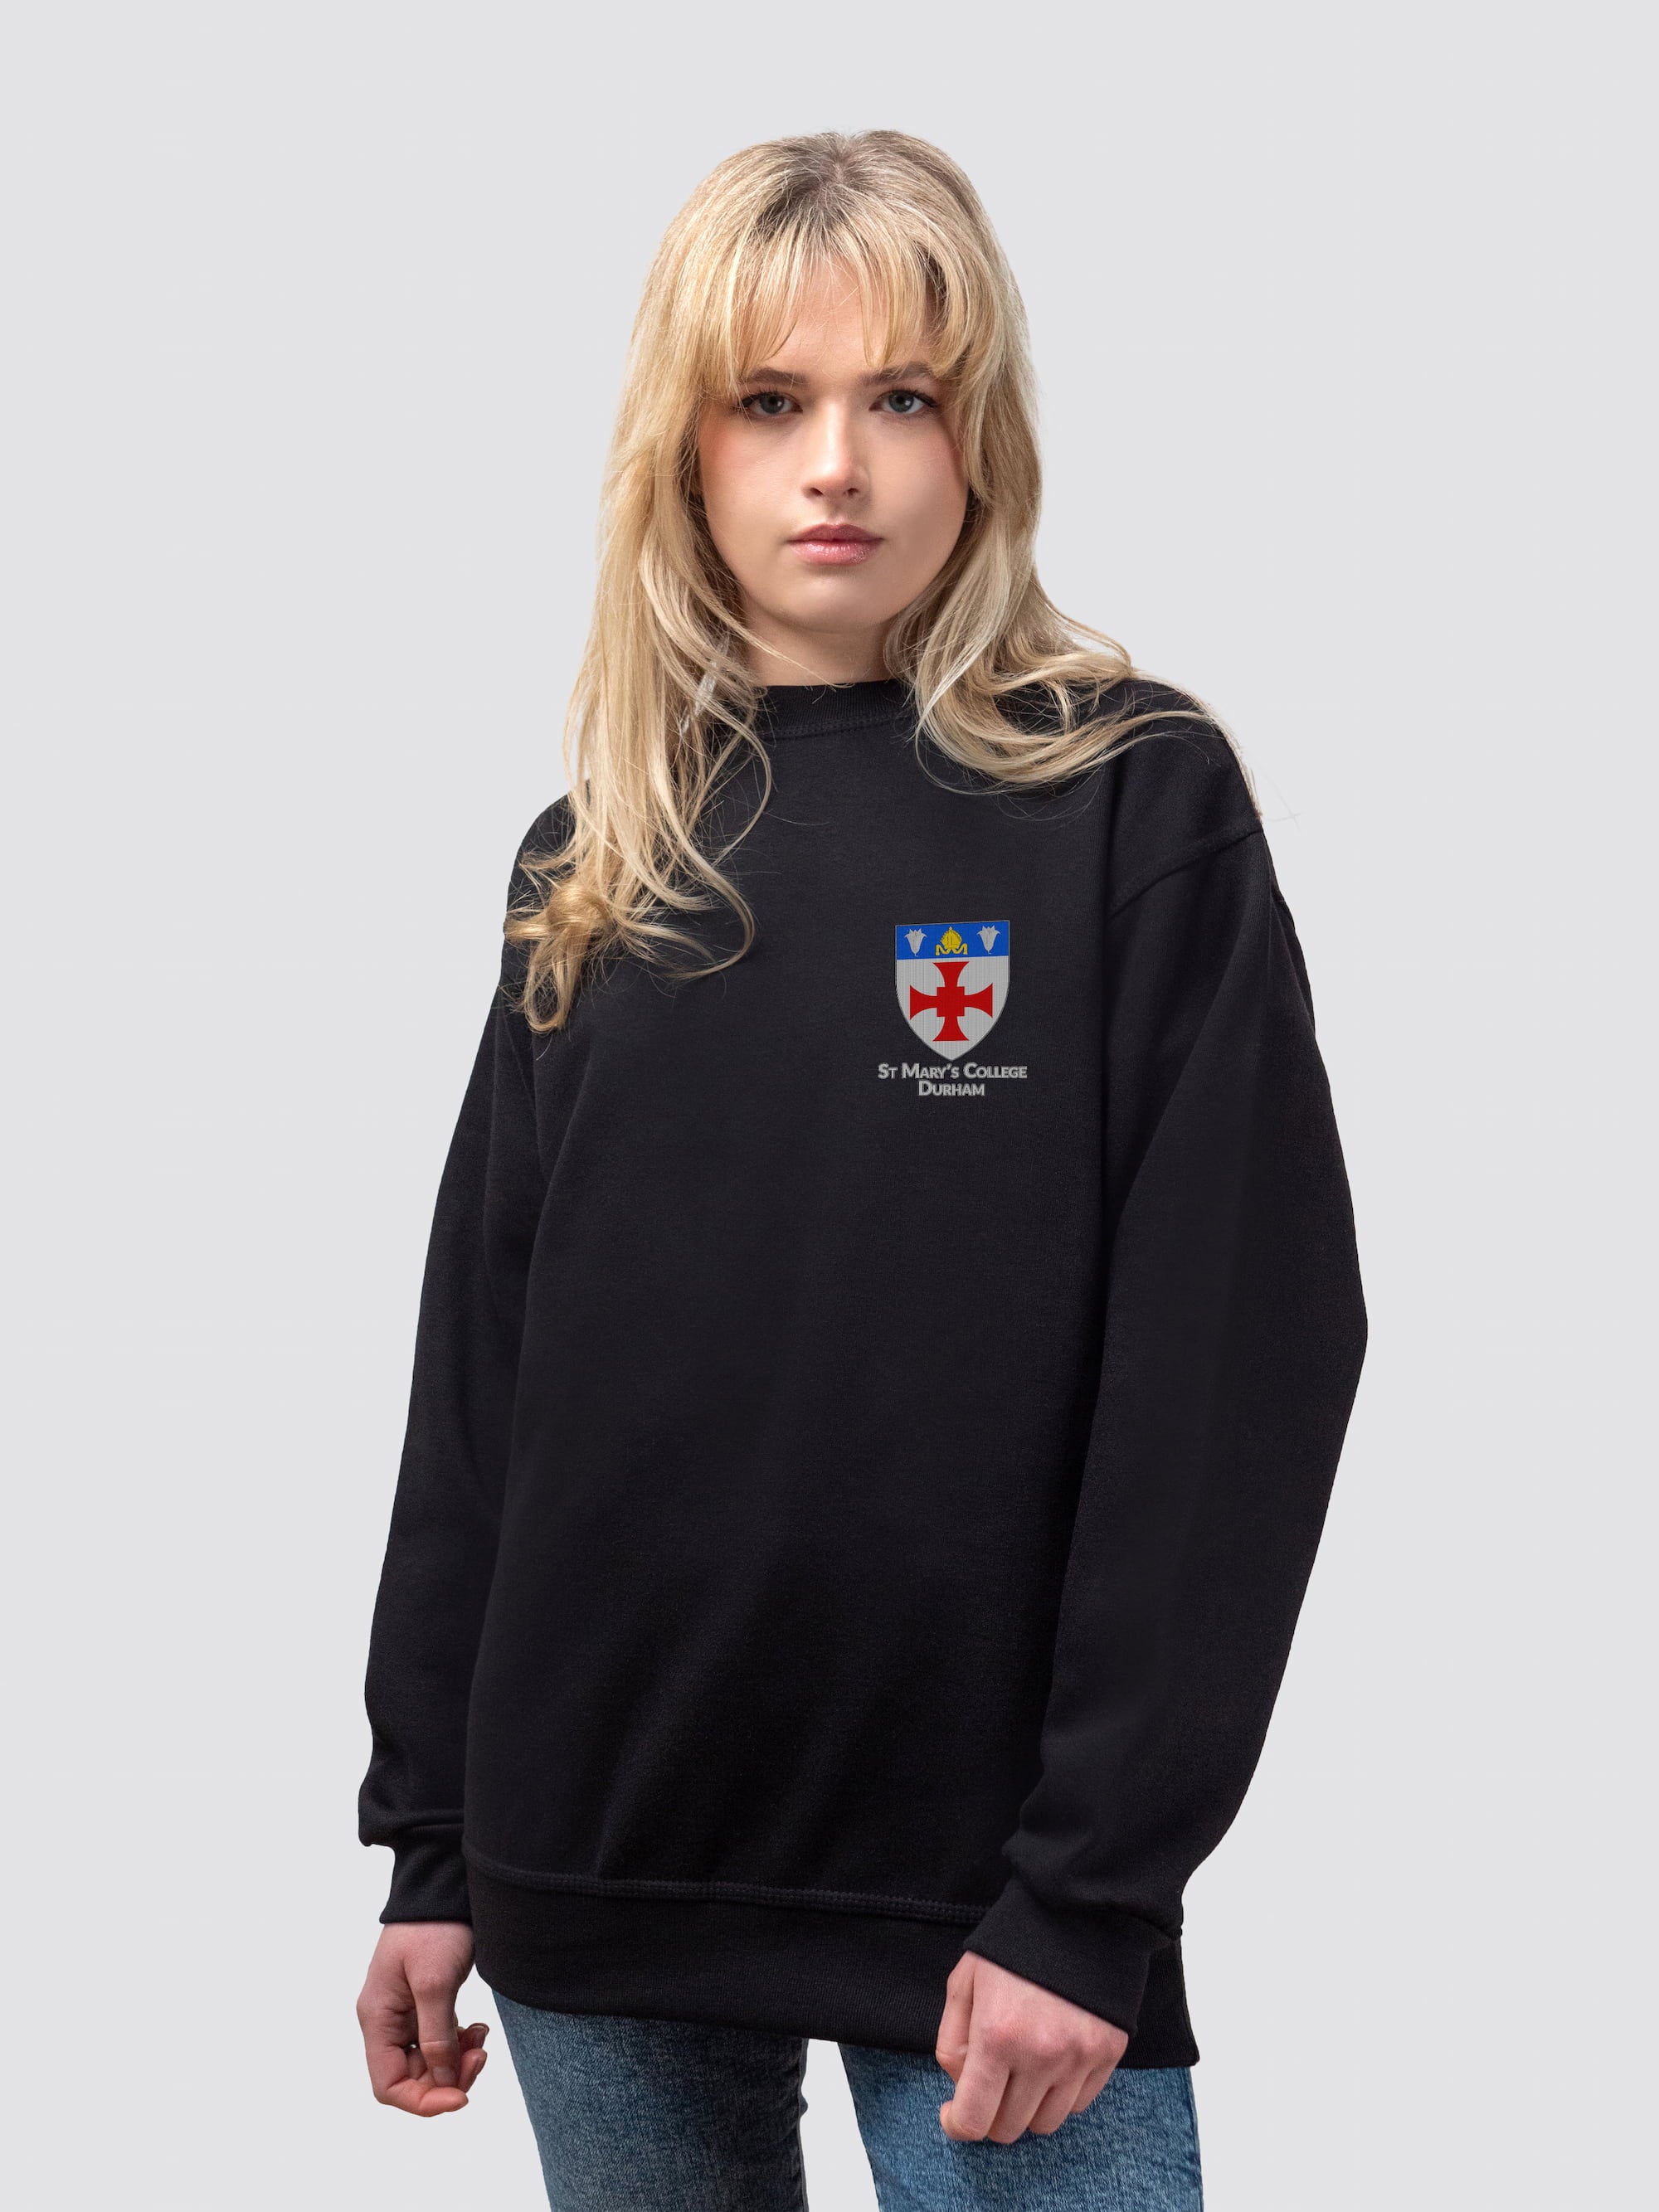 St Mary's crest on the front of a black, crew-neck sweatshirt